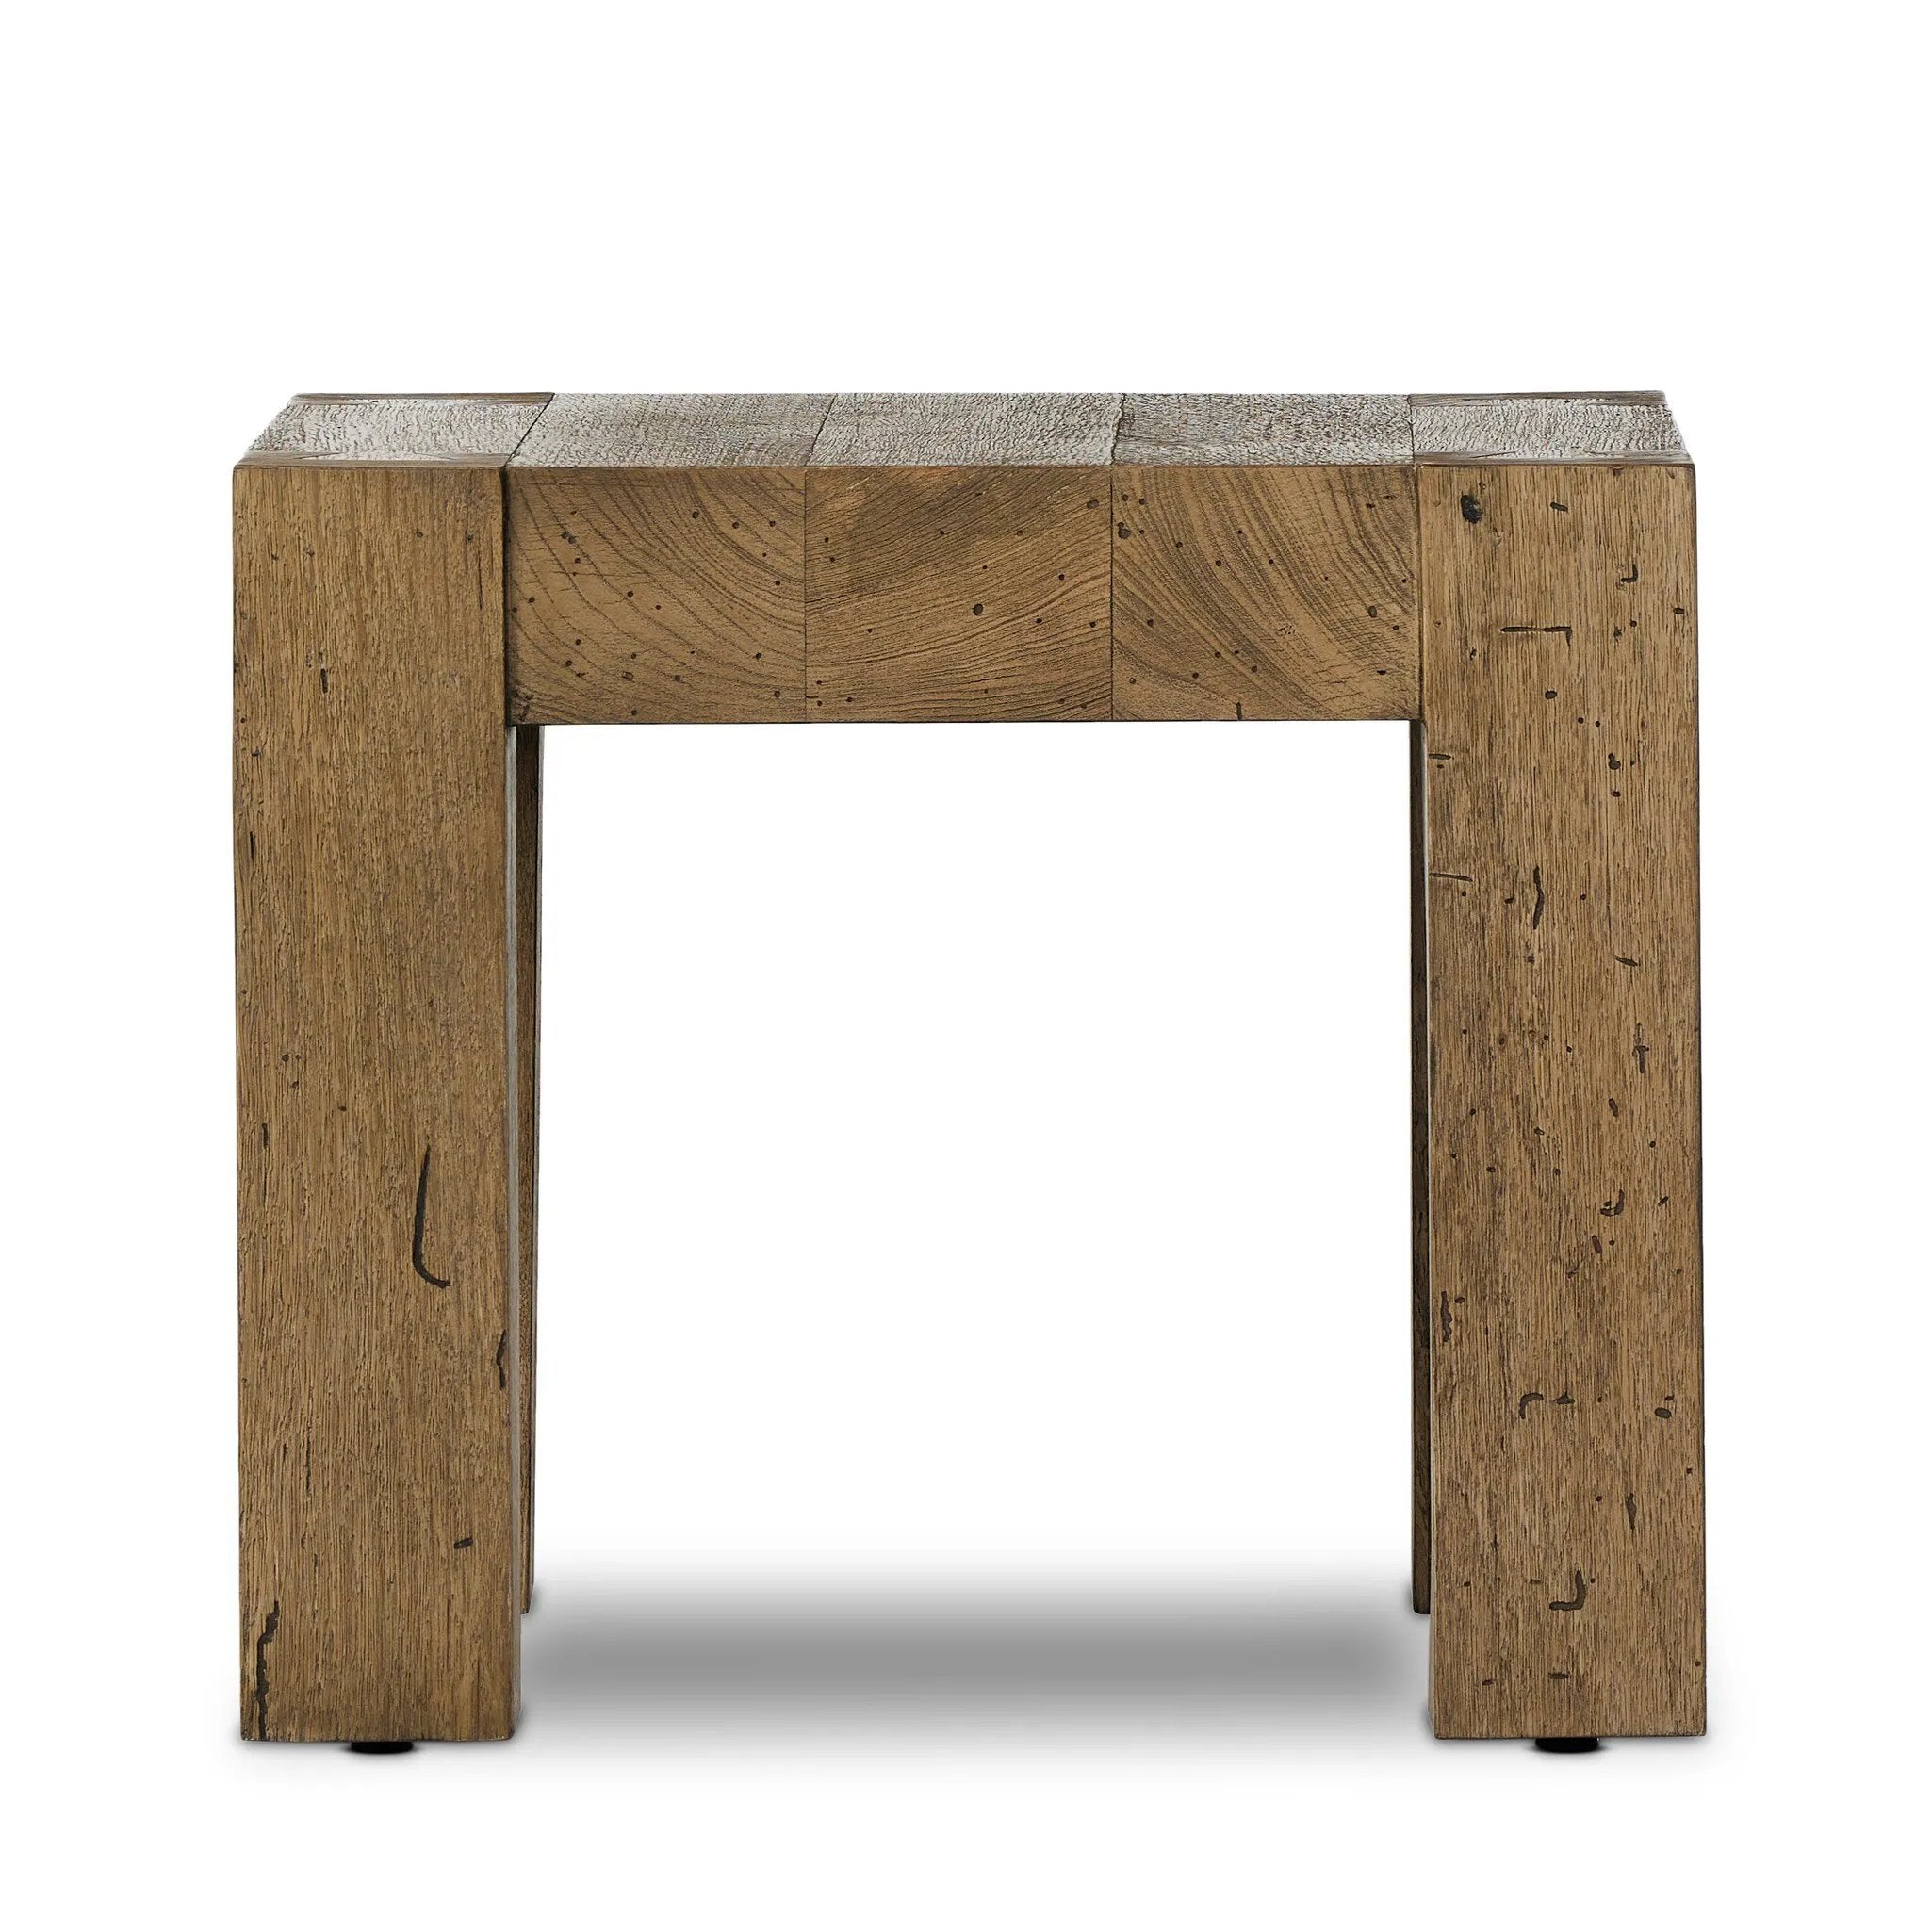 Made from thick-cut oak veneer with a faux rustic finish made to emulate wormwood, this end table features chunky squared legs and dovetail joinery detailing.Collection: Wesso Amethyst Home provides interior design, new home construction design consulting, vintage area rugs, and lighting in the Laguna Beach metro area.